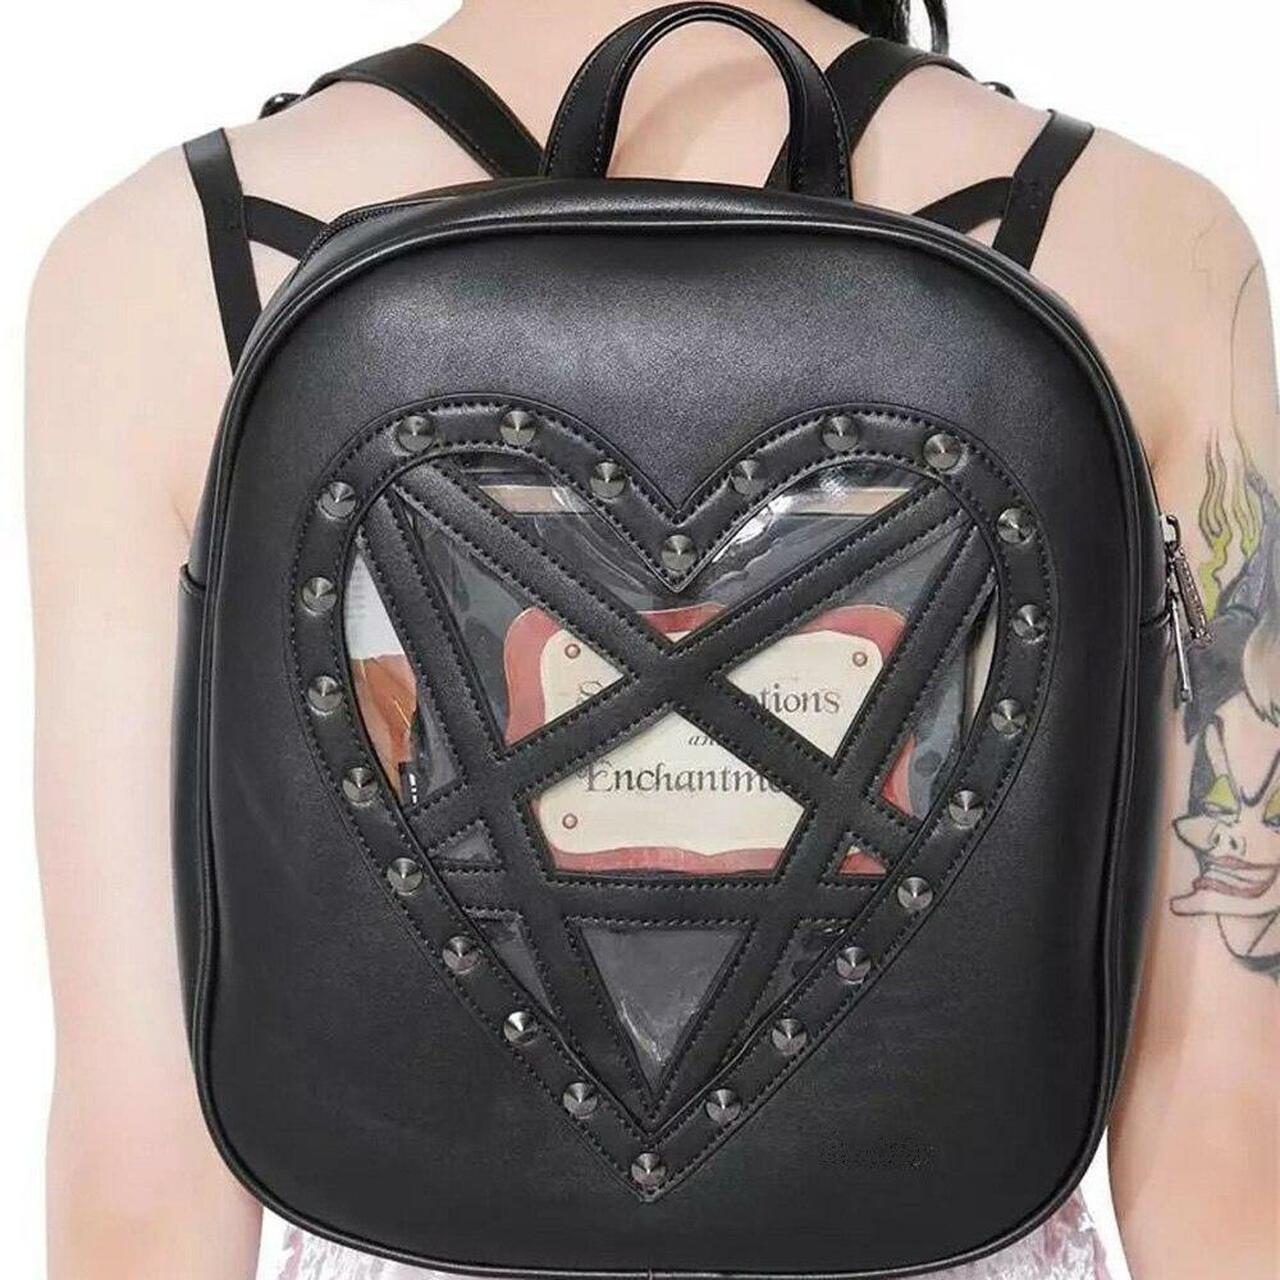 Edgy black pu leather heart backpack